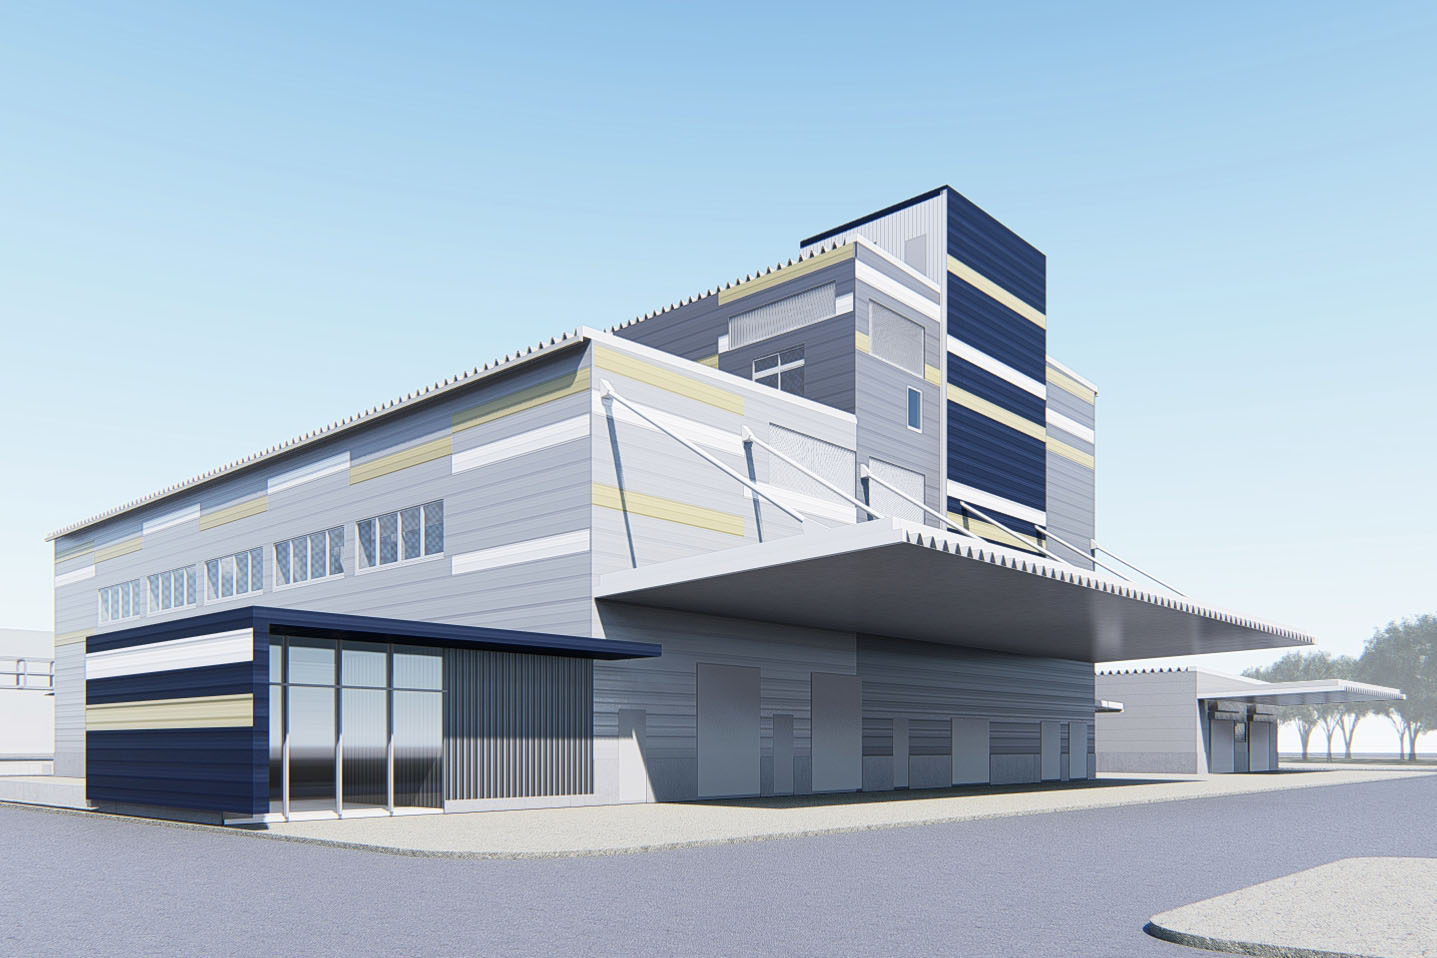 Architect’s rendering of the factory building of the NPAC Okayama Plant